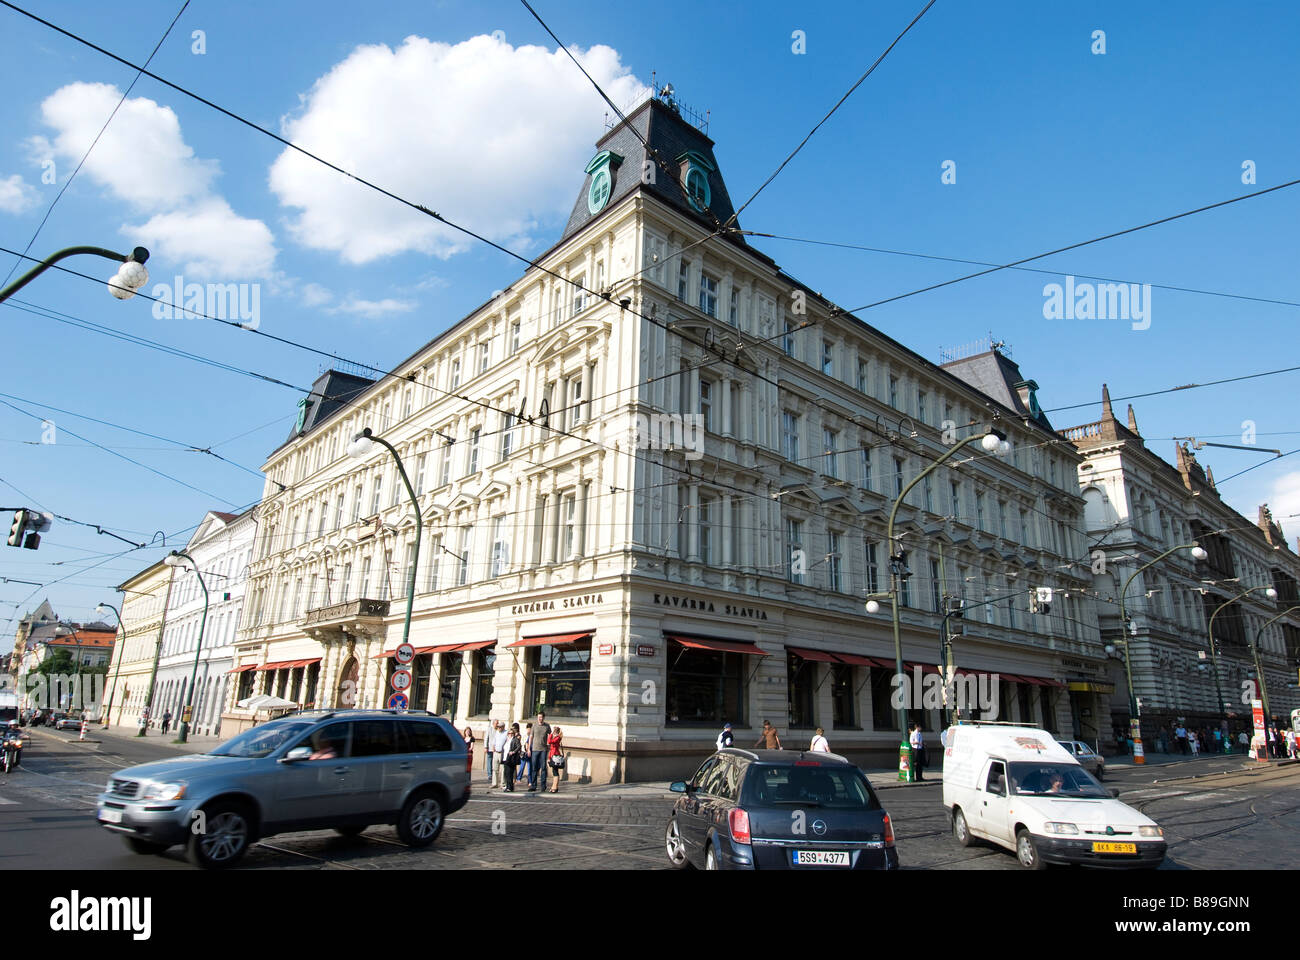 Slavia prague hi-res stock photography and images - Page 2 - Alamy